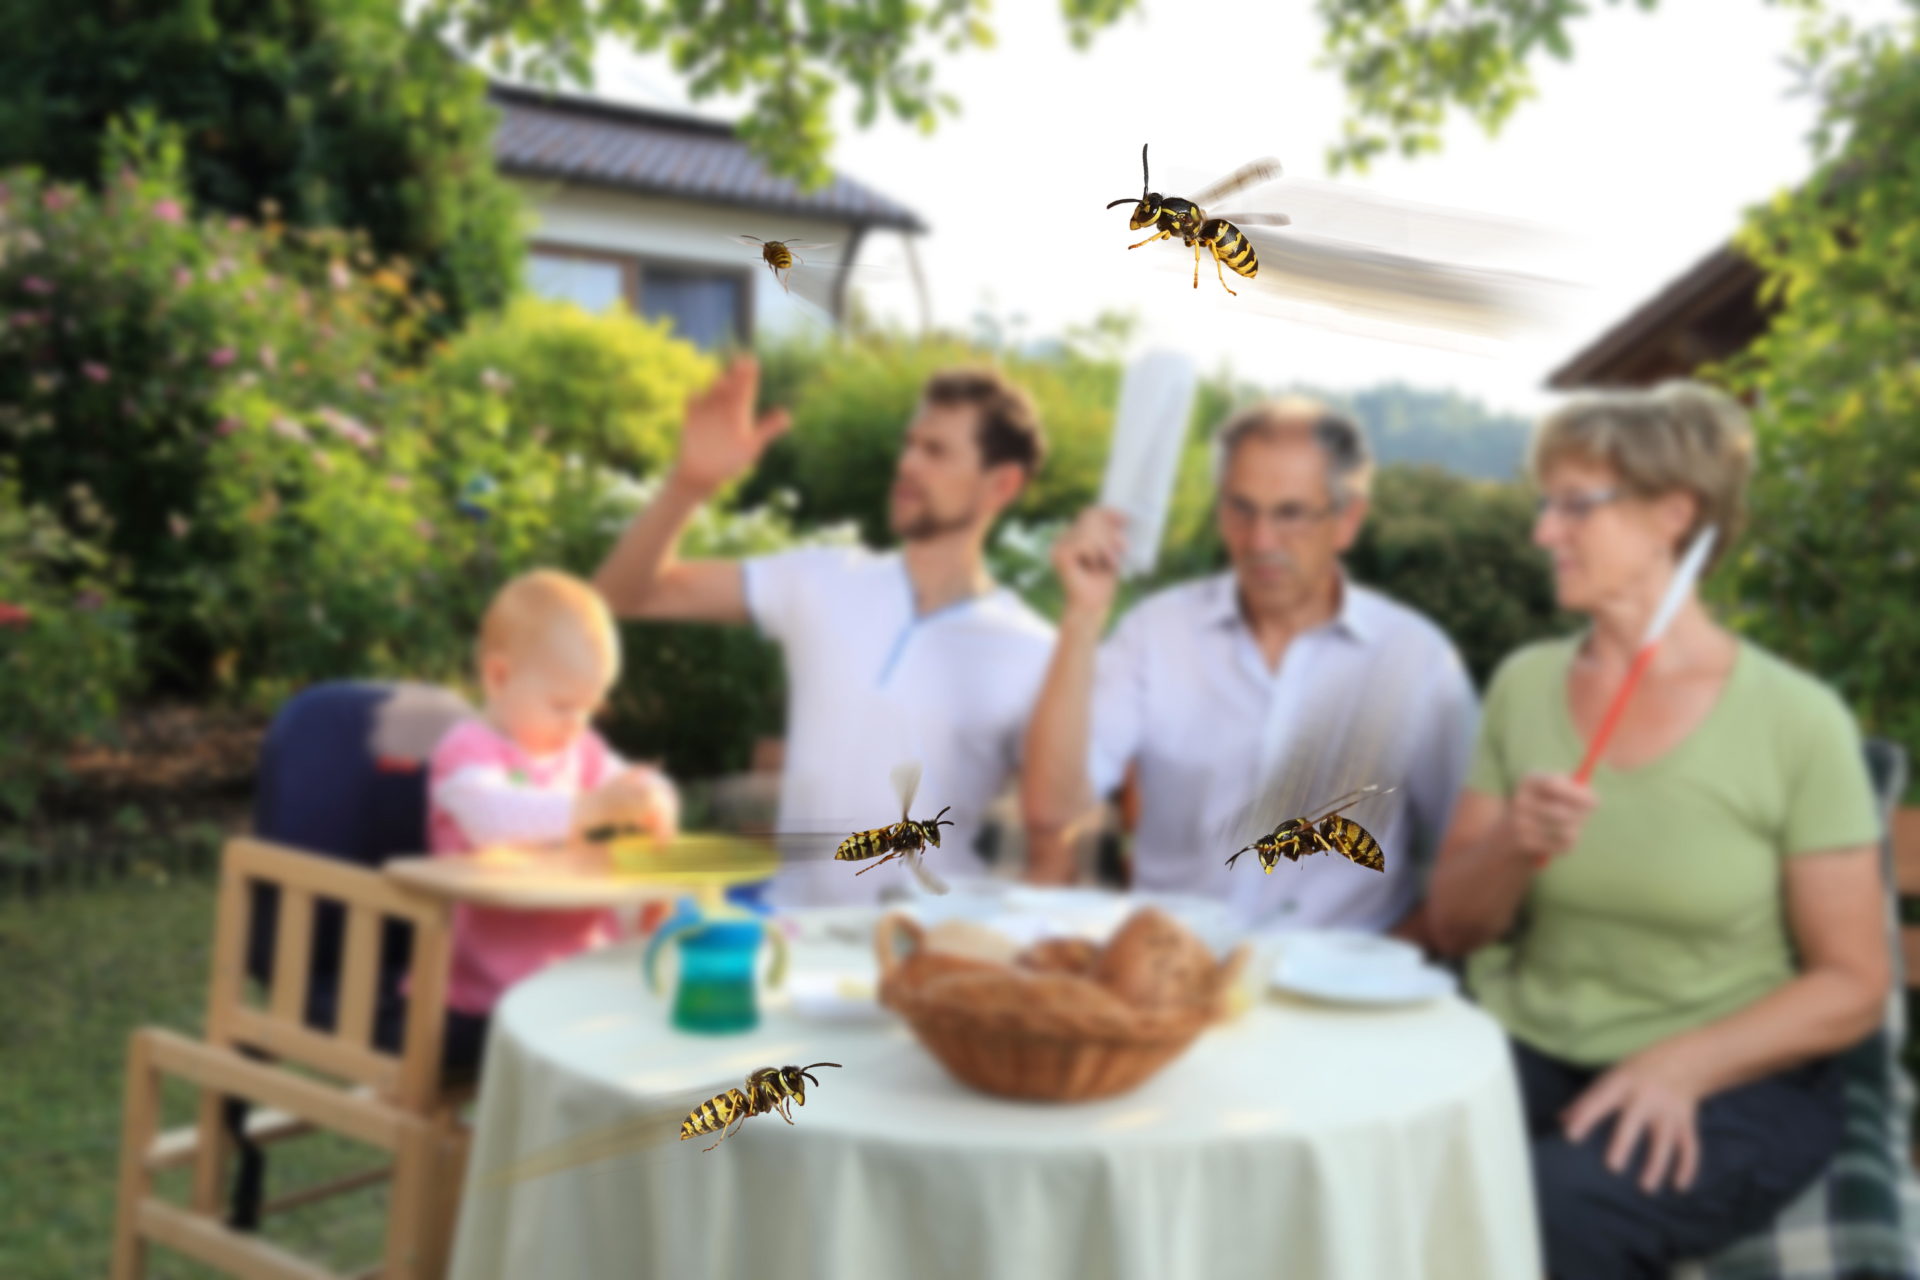 A family having a picnic as wasps approach 